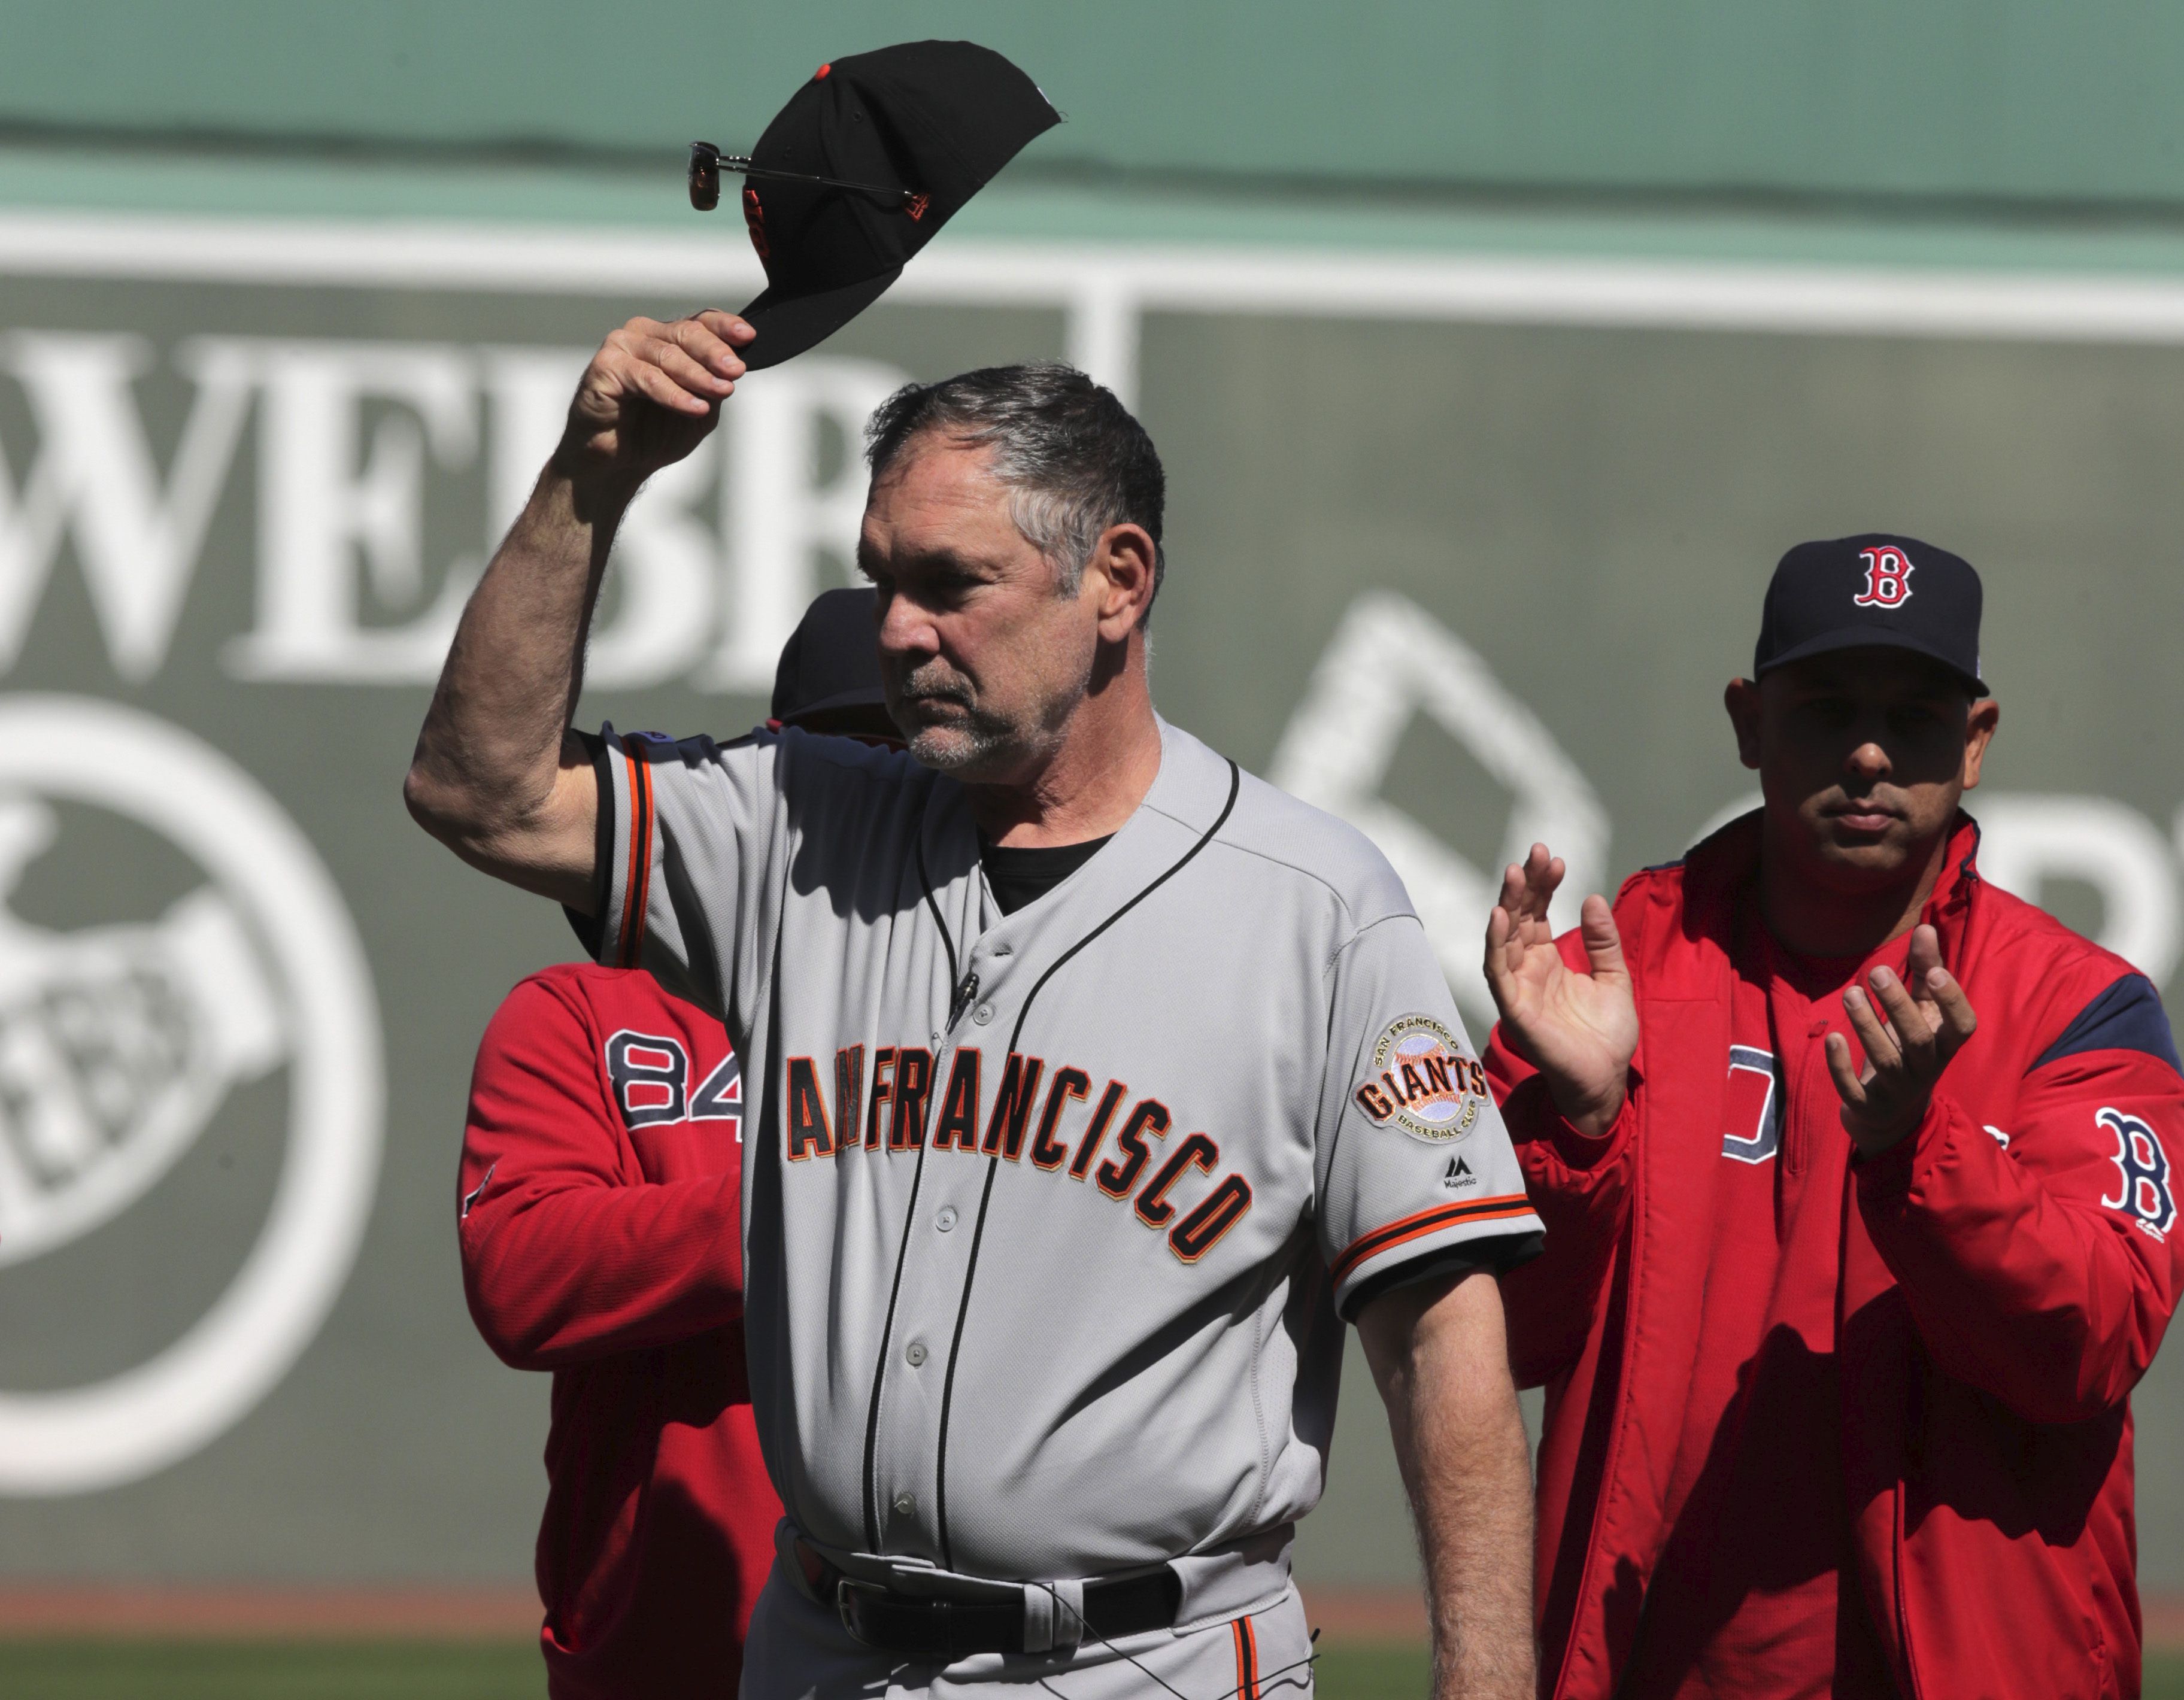 Players You Forgot Were Astros: Manager Bruce Bochy